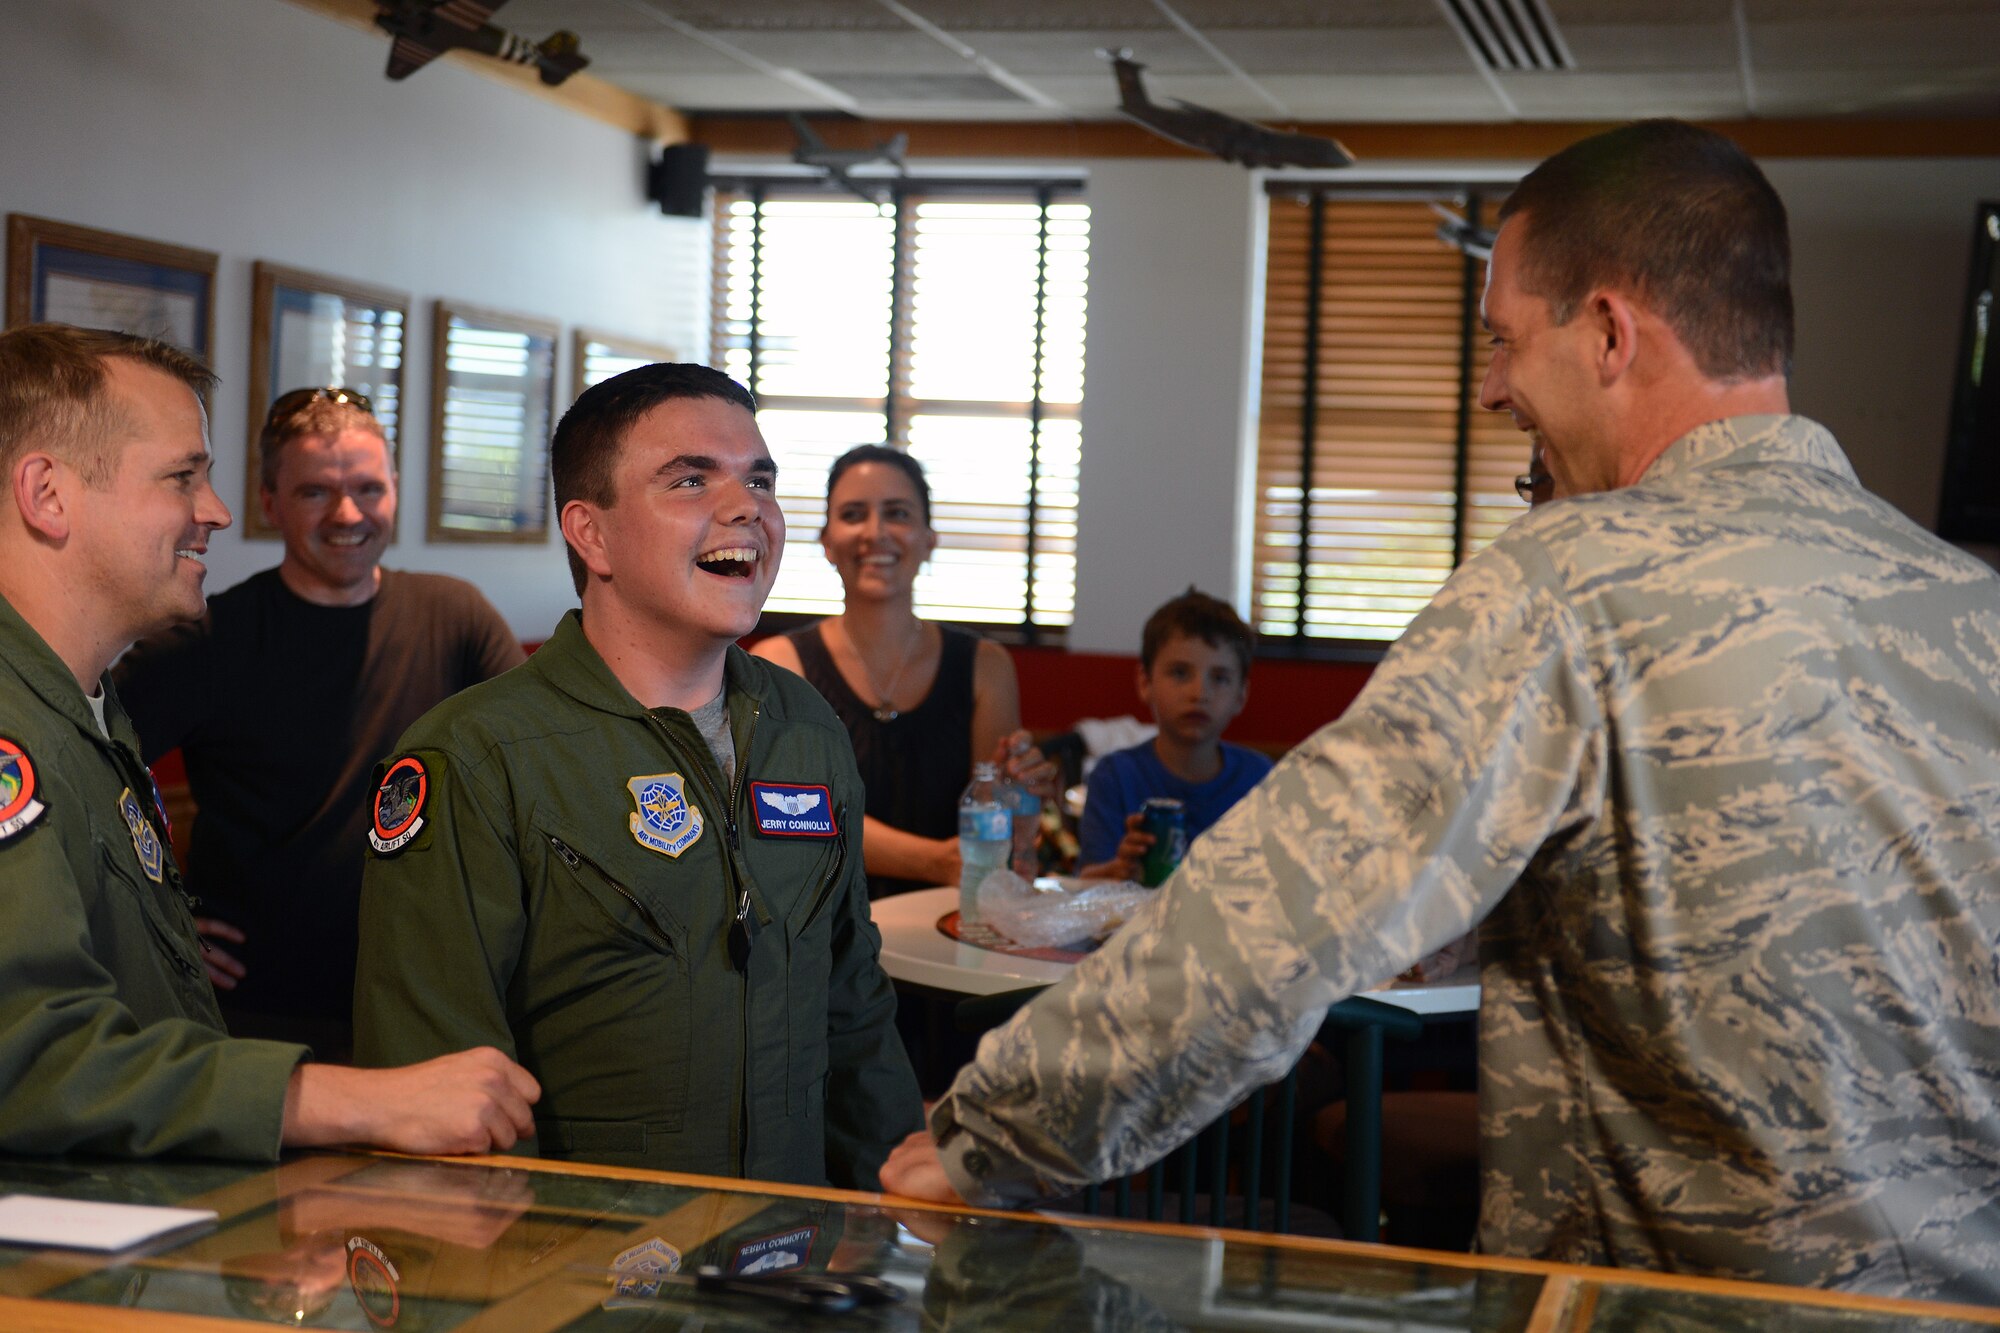 Lt. Col. Matt Anderson(left), 4th Airlift Squadron commander, and Jerry Connolly(center), pilot for a day, tell Col. Ethan Griffin, 62nd Airlift Wing vice commander, about the events that took place during the pilot for a day July 14, 2014, at Joint Base Lewis-McChord, Wash. Griffin presented Connolly with a commander’s coin during his farewell party put on by the 4th AS. (U.S. Air Force photo/Airman 1st Class Jacob Jimenez)  